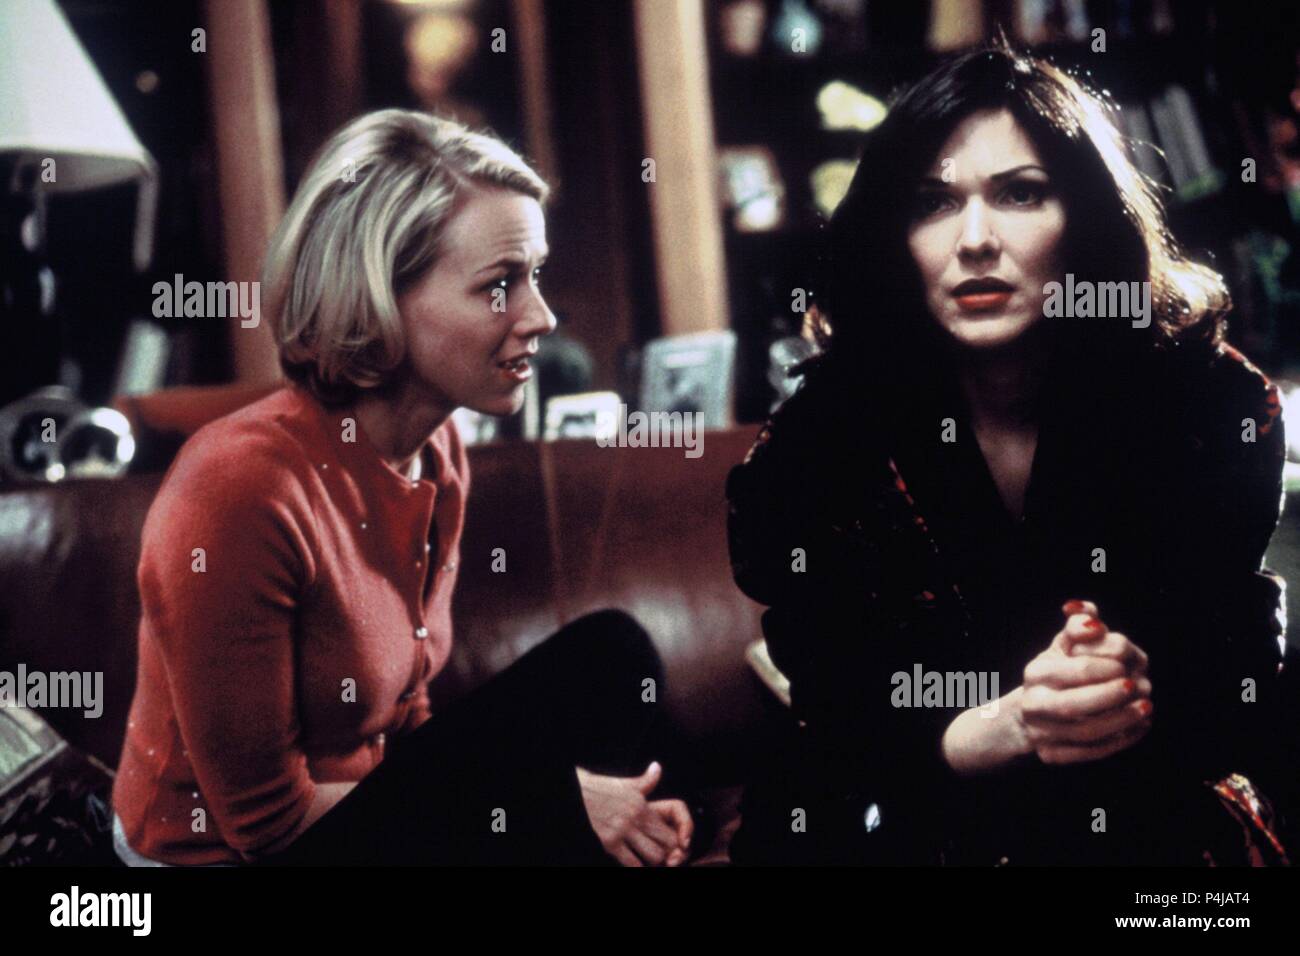 Original Film Title: MULHOLLAND DR..  English Title: MULHOLLAND DRIVE.  Film Director: DAVID LYNCH.  Year: 2001.  Stars: NAOMI WATTS; LAURA HARRING. Credit: THE PICTURE FACTORY ASYMMETRICAL PRODUCTIONS/IMAGINE TELEVIS / Album Stock Photo